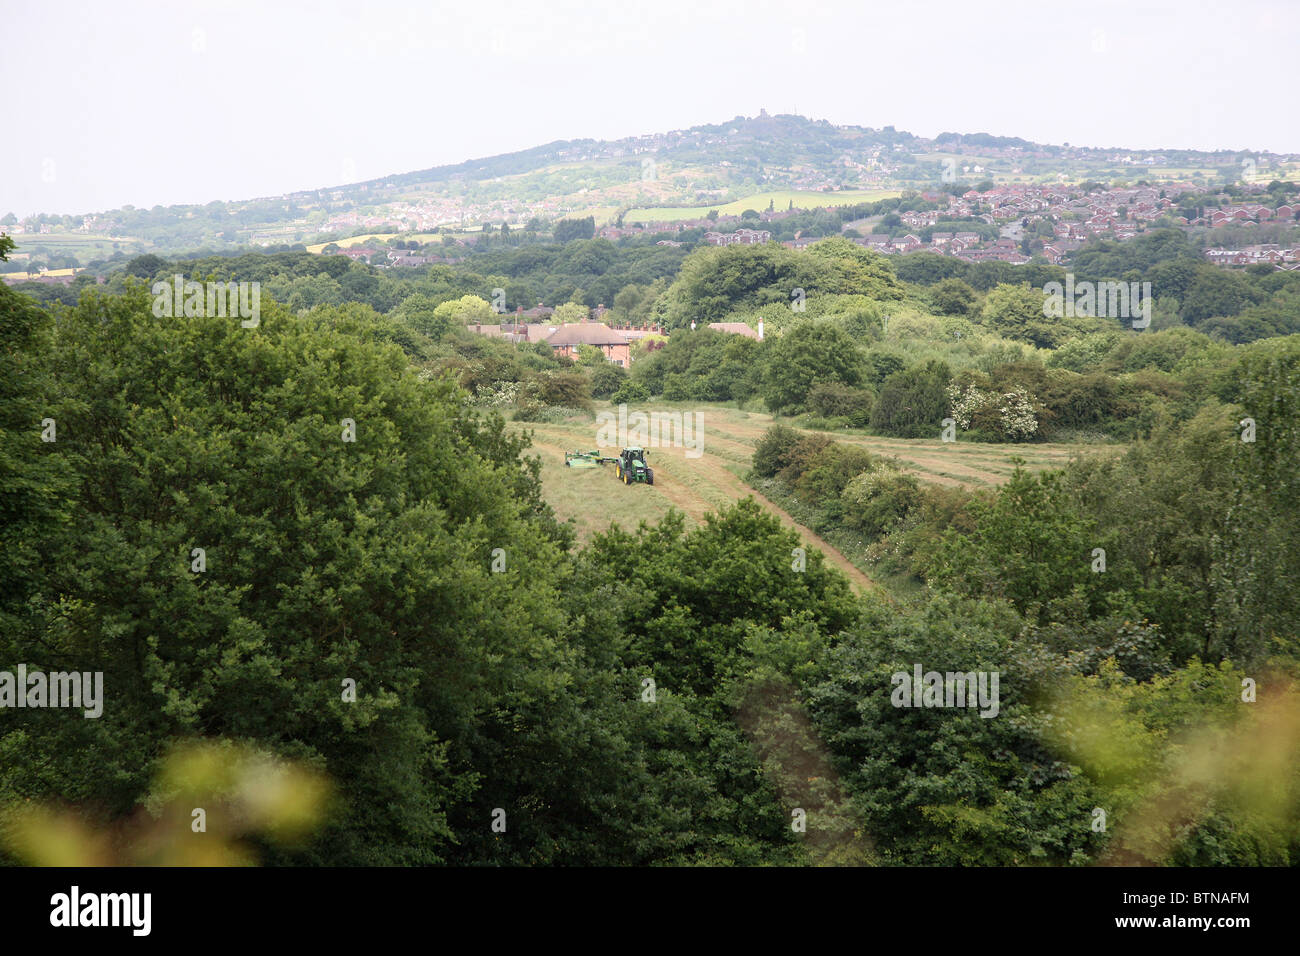 A tractor mowing a grass field with Mow Cop castle folly in the background Stock Photo